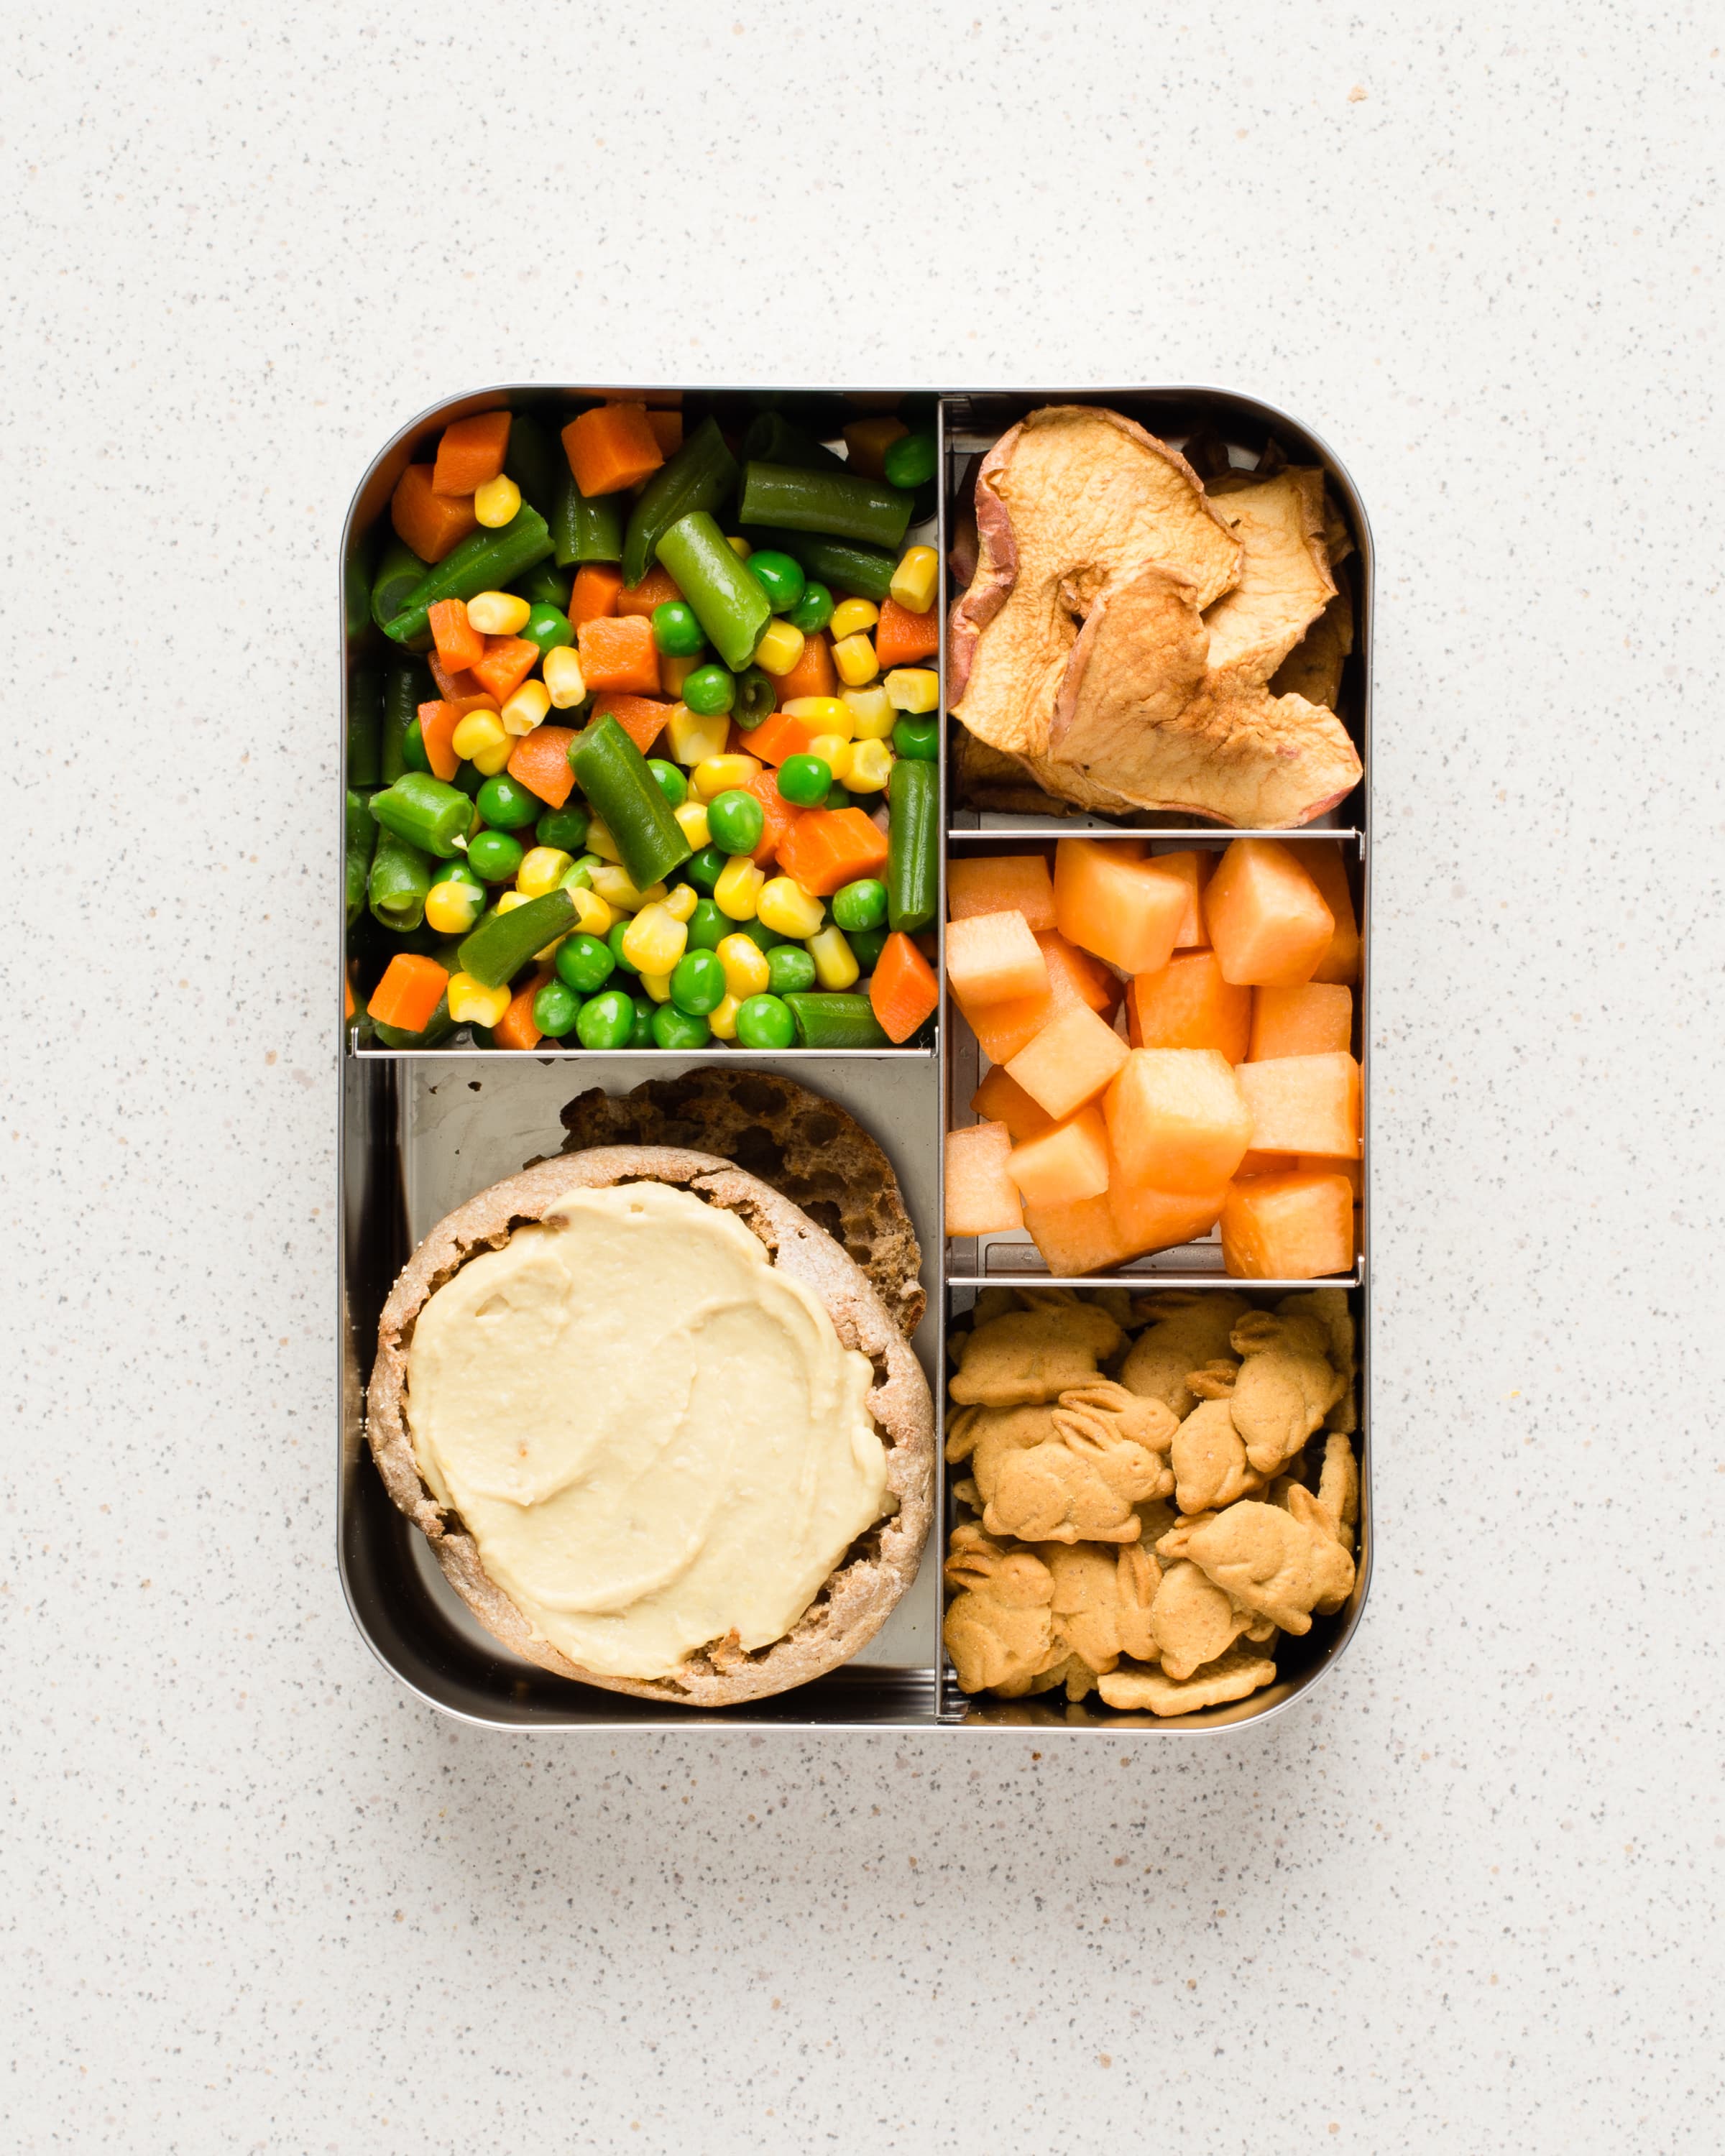 Healthy Toddler Bento Box Lunch Ideas for Preschoolers #healthy #easy  #preschool #preschool #lunchbox #todd…